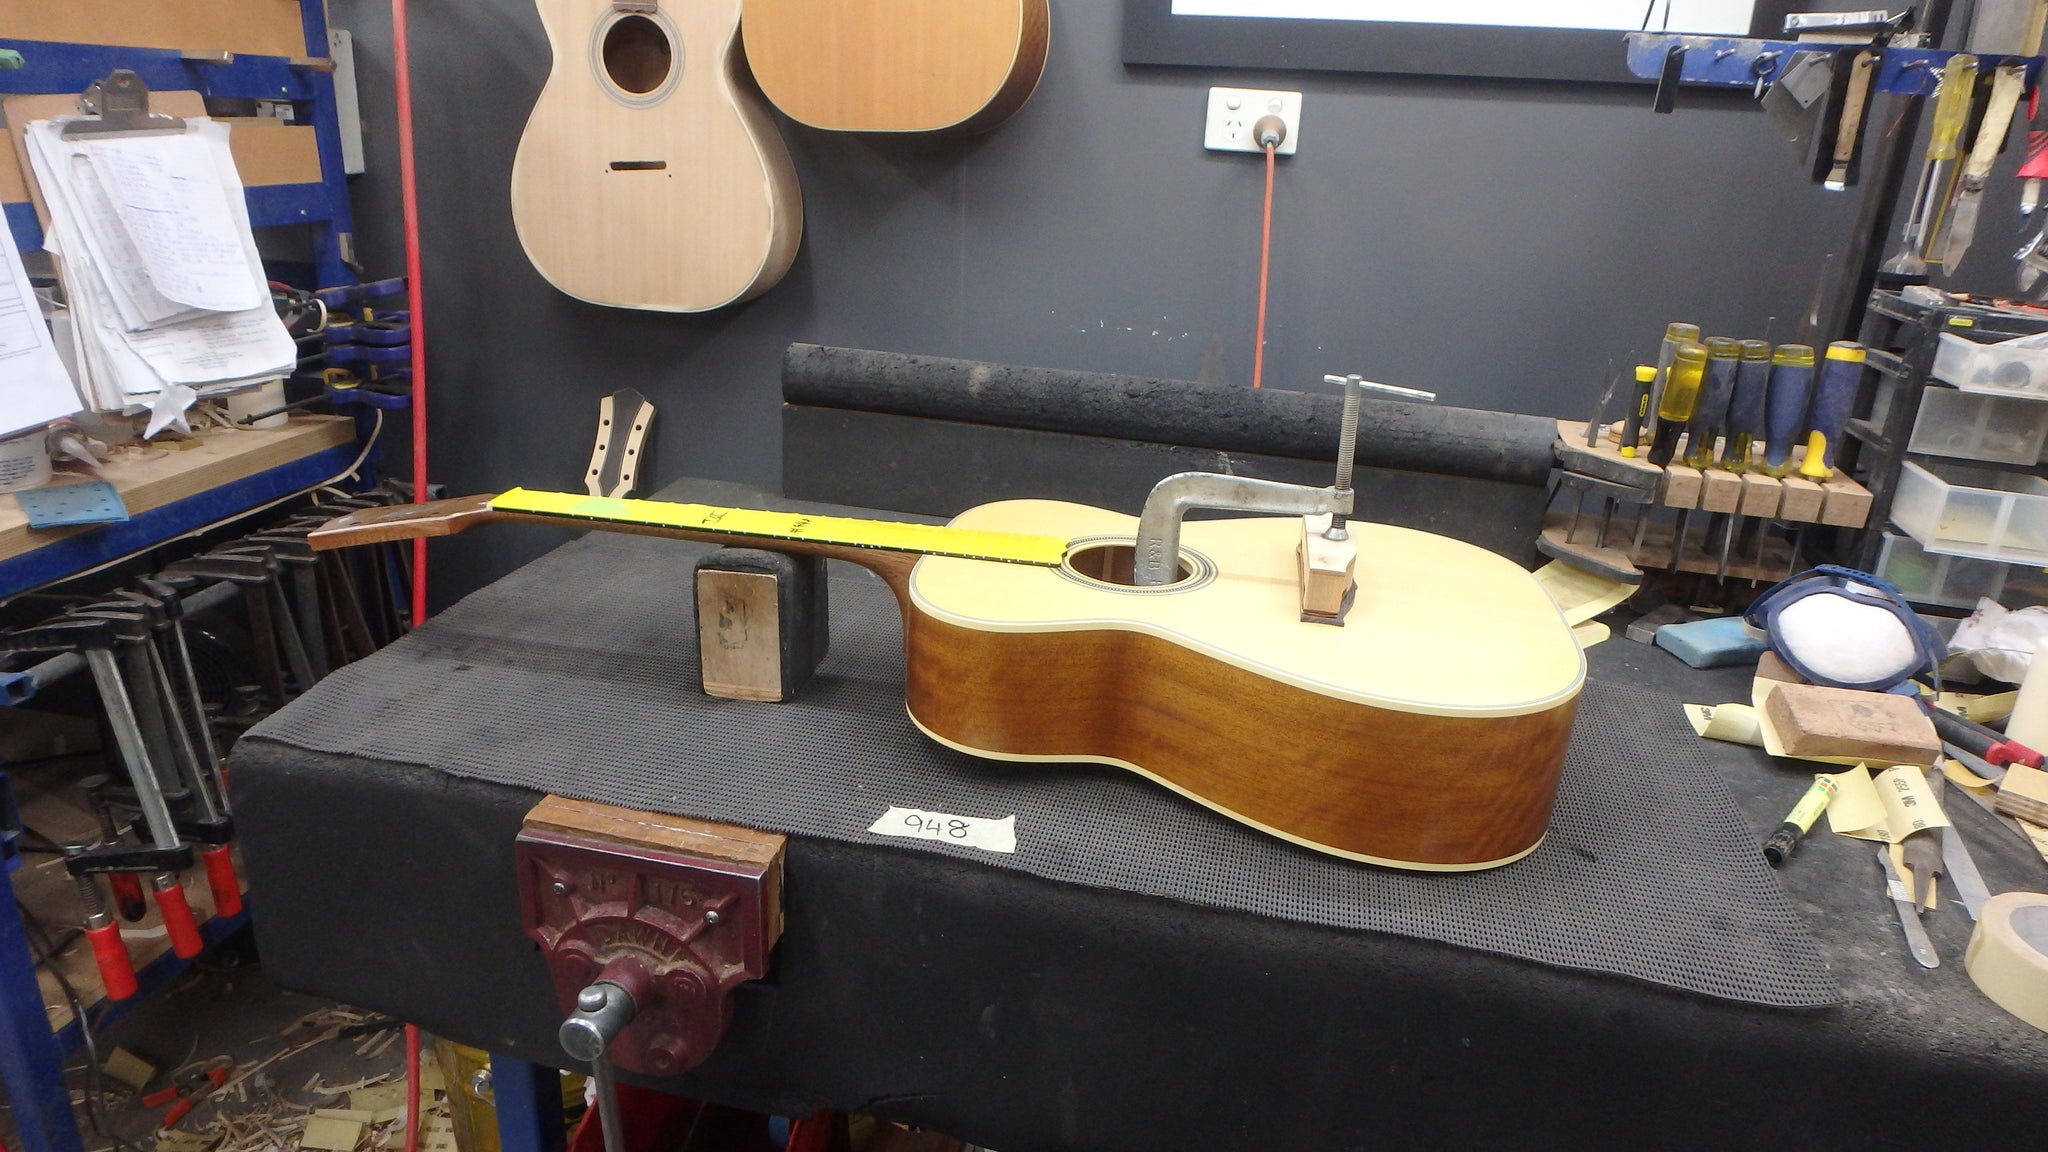 Maton T.E Personal Guitar Sitka Spruce and AAA"Bees Wings" Queensland Maple ID-11722 - Artisan Guitars